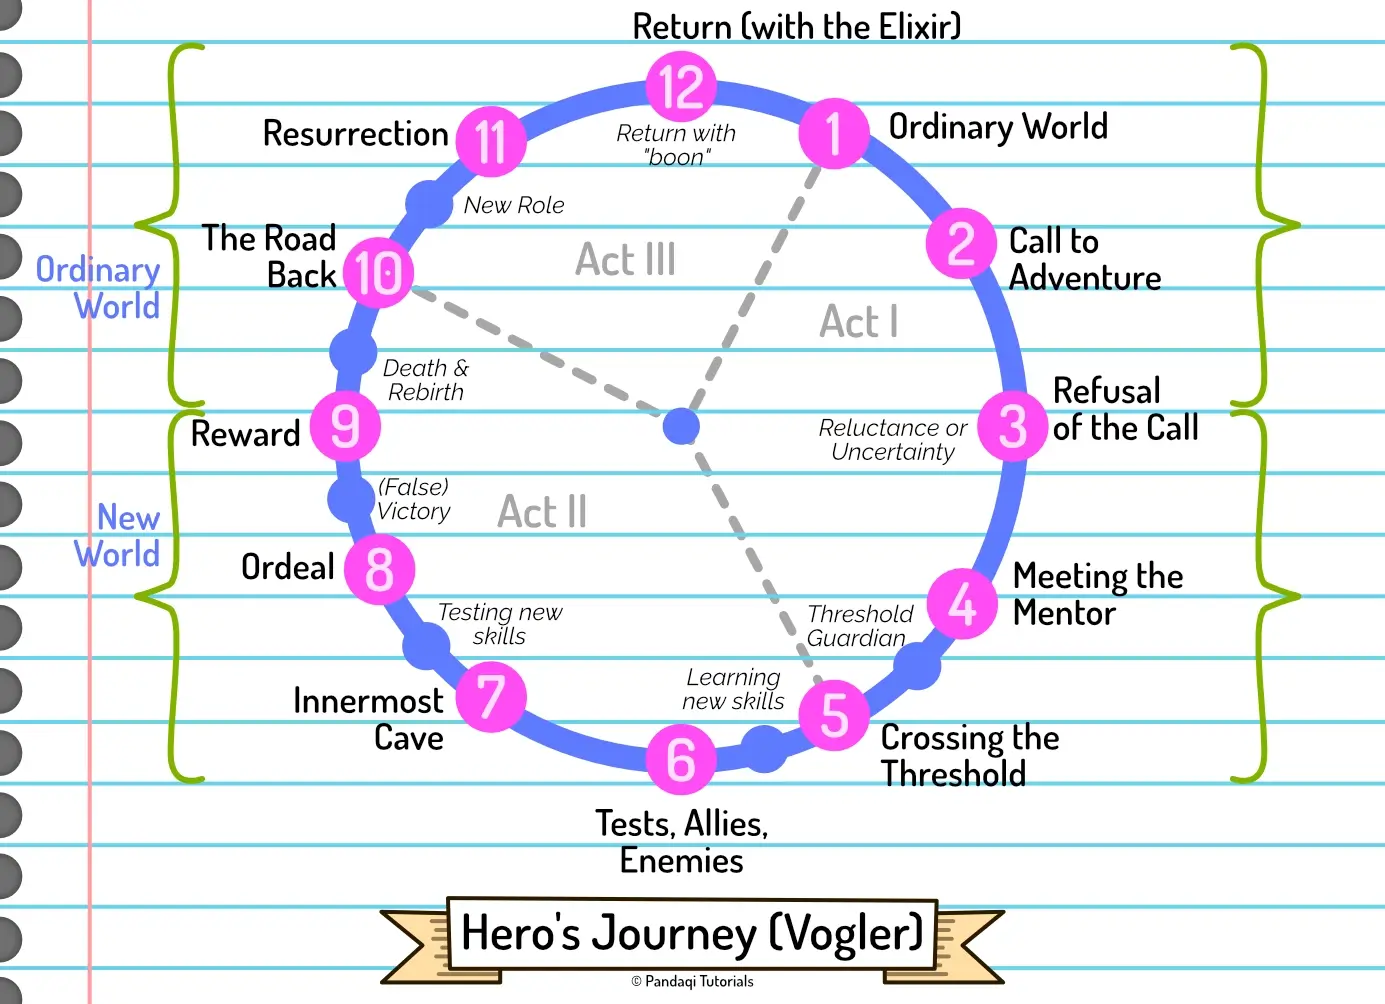 Visualization of the simplified (modernized) Hero’s Journey, with 12 steps.